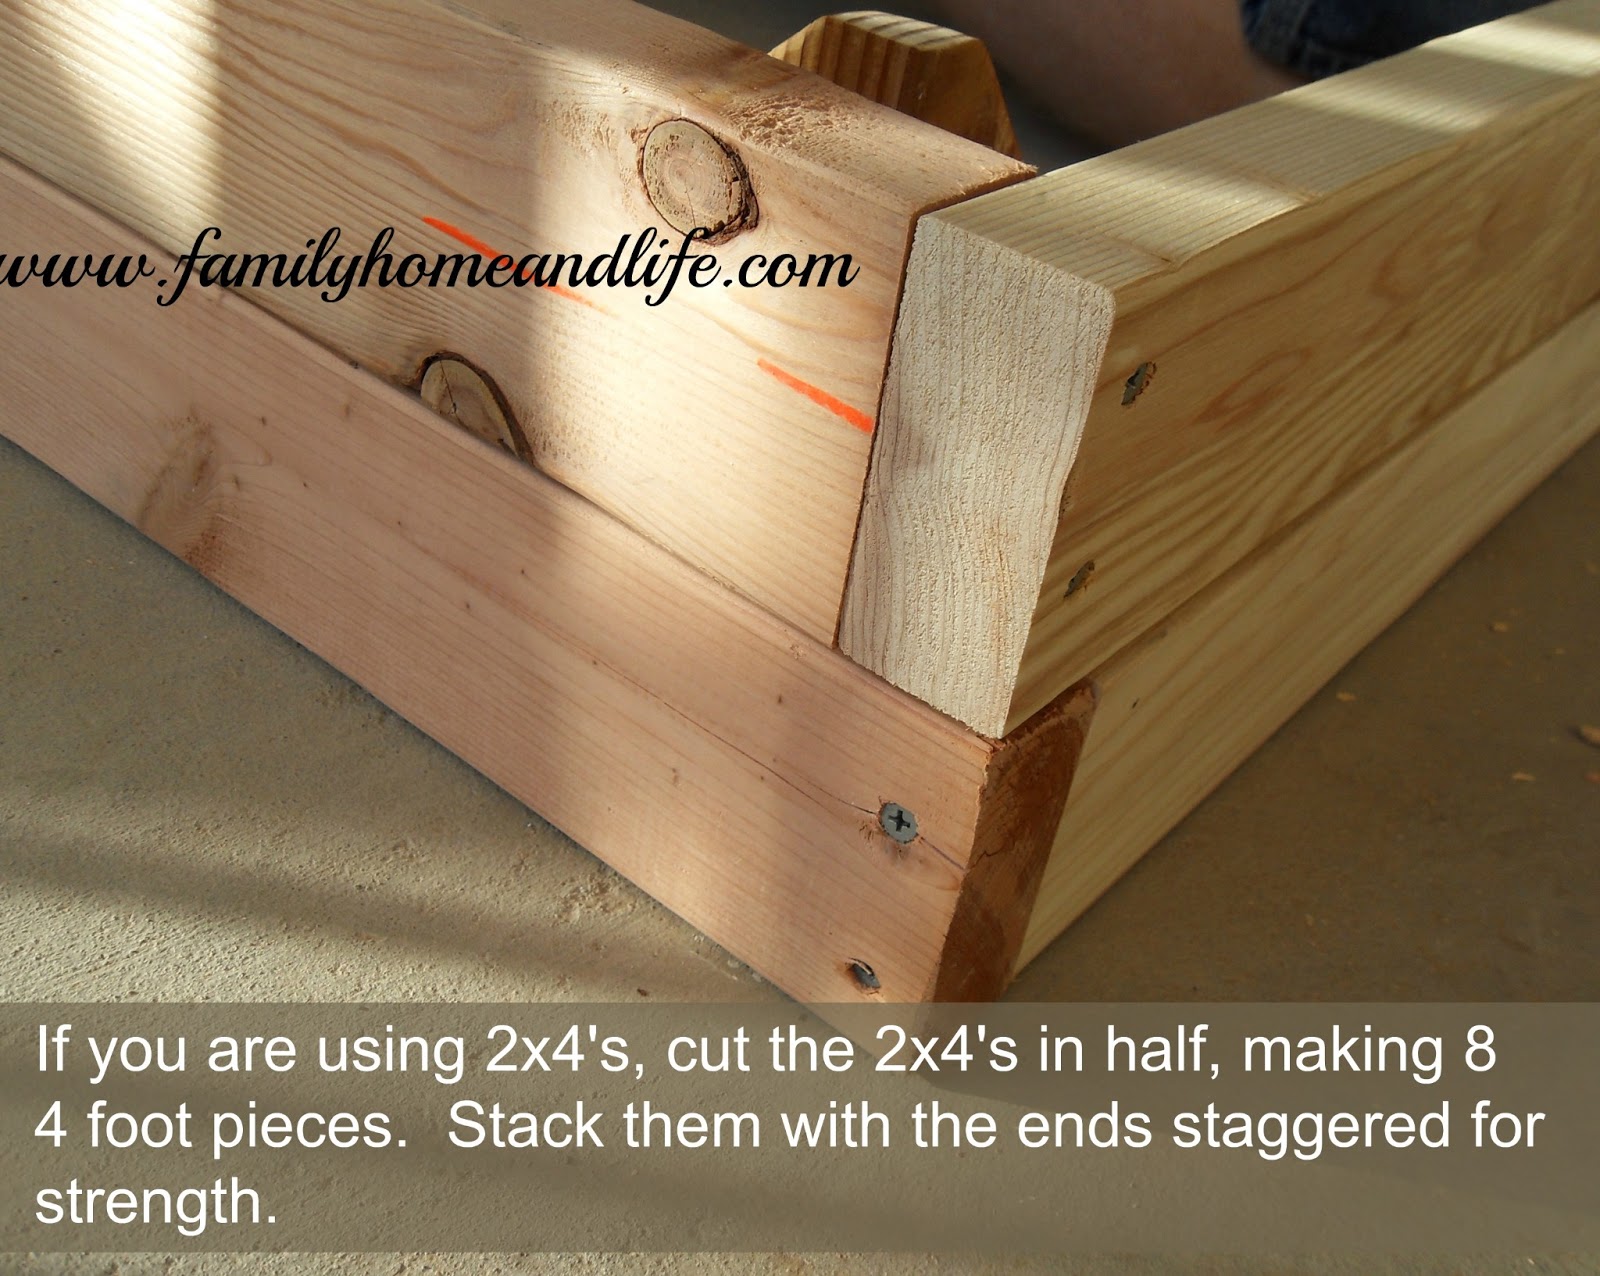 Sandbox, Play sand, Woodworking projects